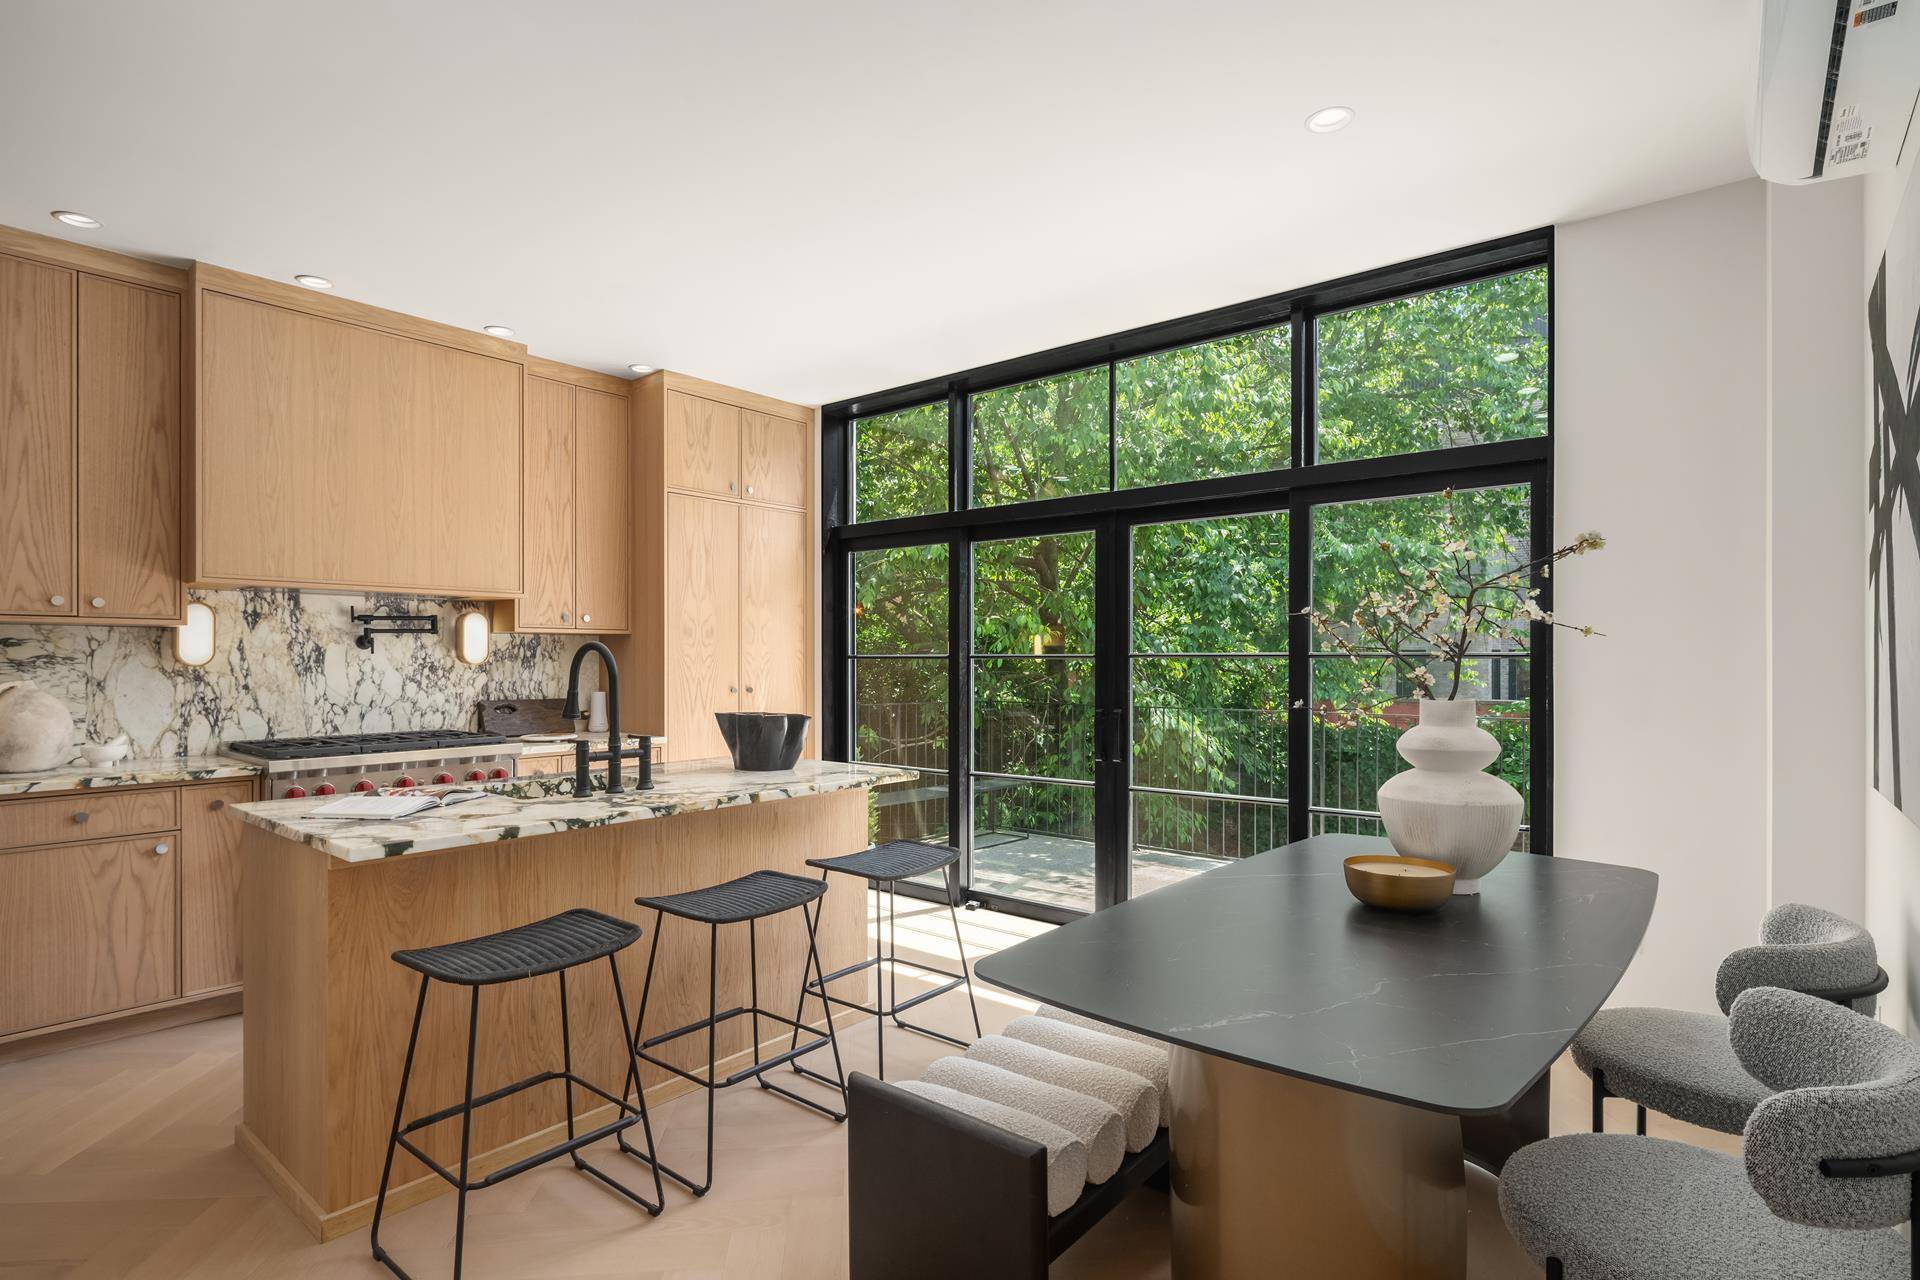 Discover the epitome of Brooklyn living in this beautifully renovated single family townhouse located in the vibrant Gowanus neighborhood.